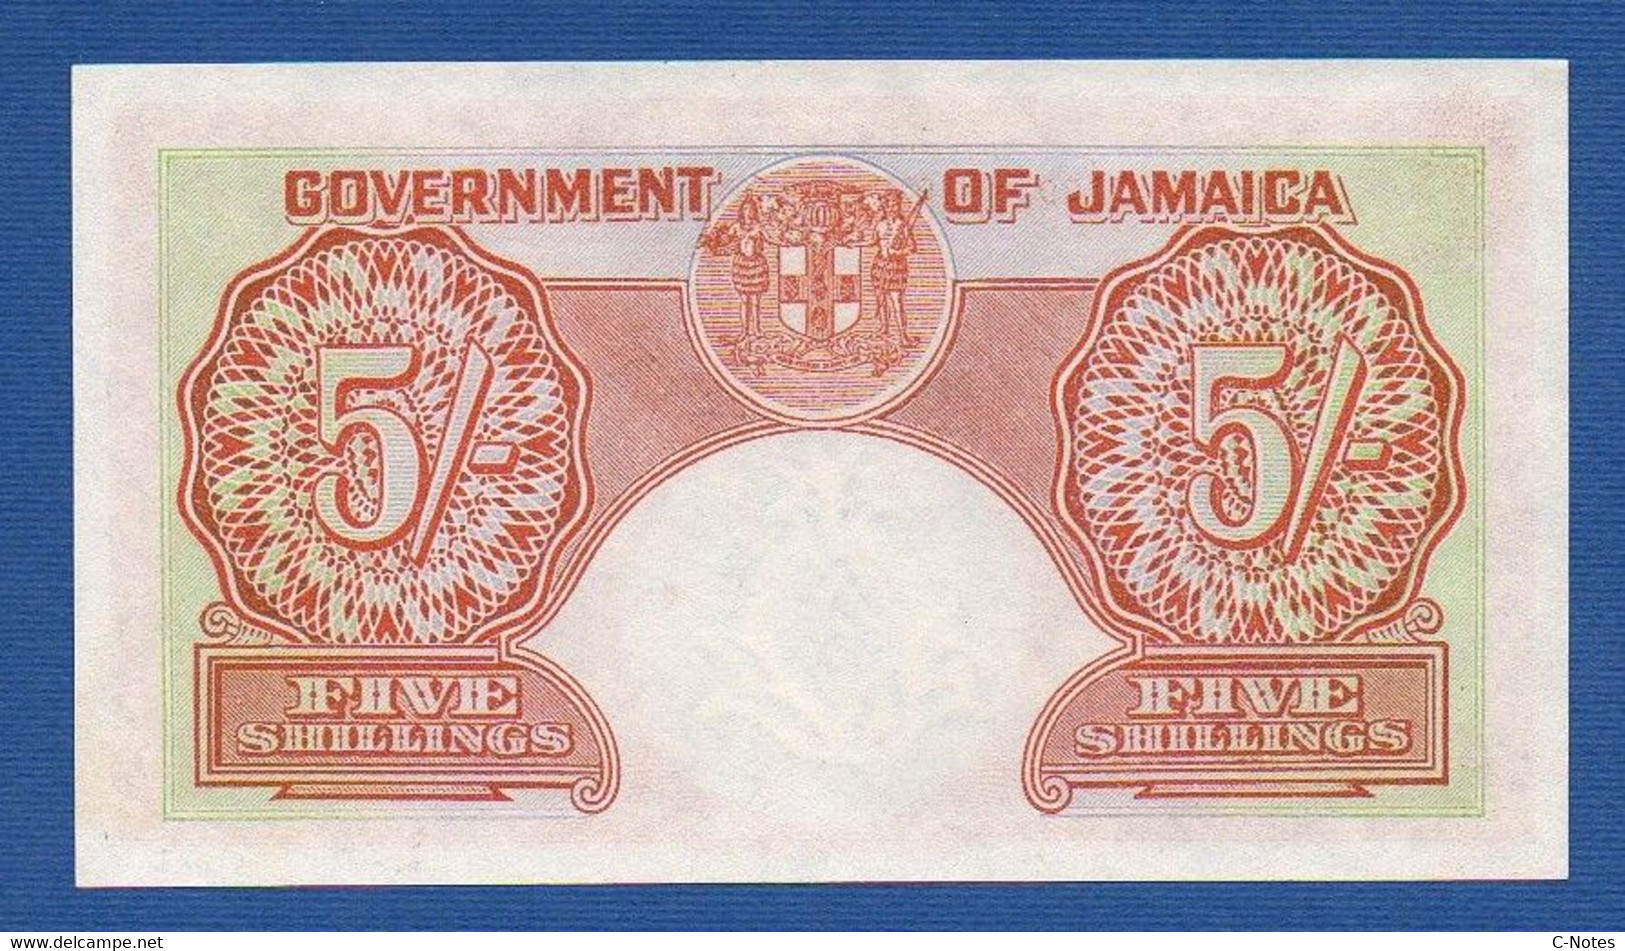 JAMAICA - P.37b – 5 Shillings 01.03.1953 UNC-, Serie 28D83804 -"George VI - Value On Back In 2 Lines" Issue - Jamaica